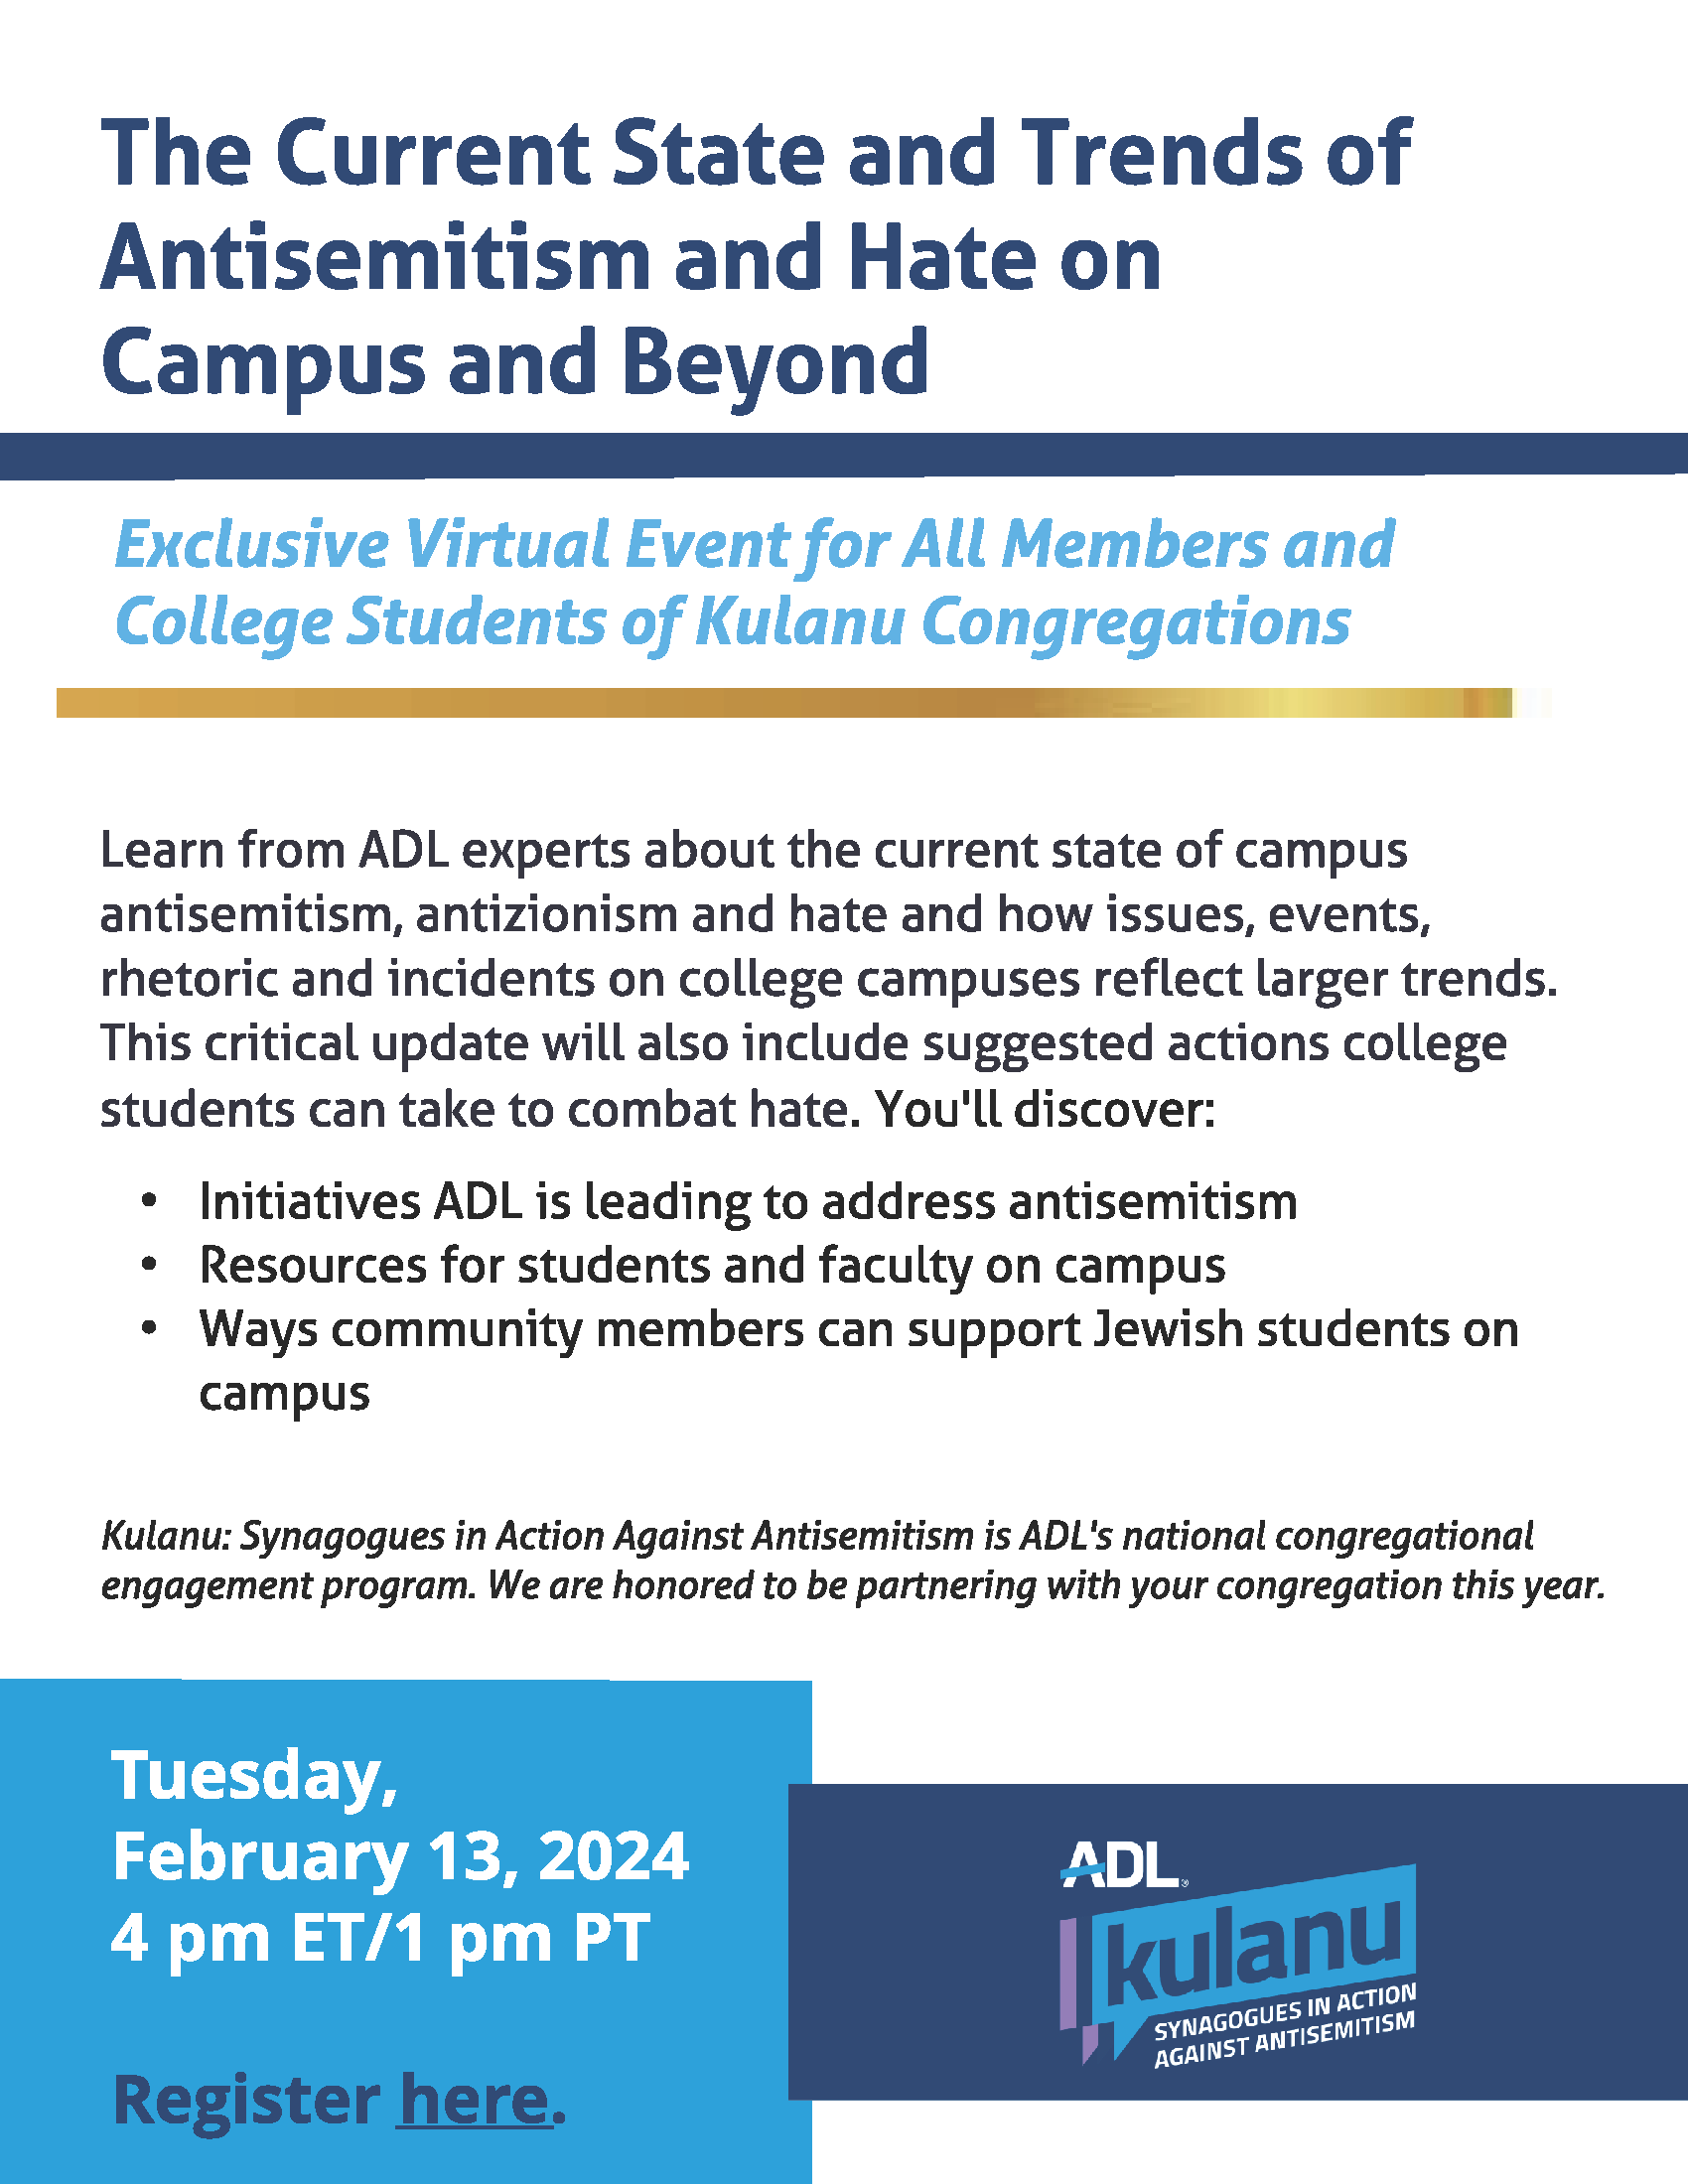 ADL Kulanu Webinar: The Current State and Trends of Antisemitism and Hate on Campus and Beyond